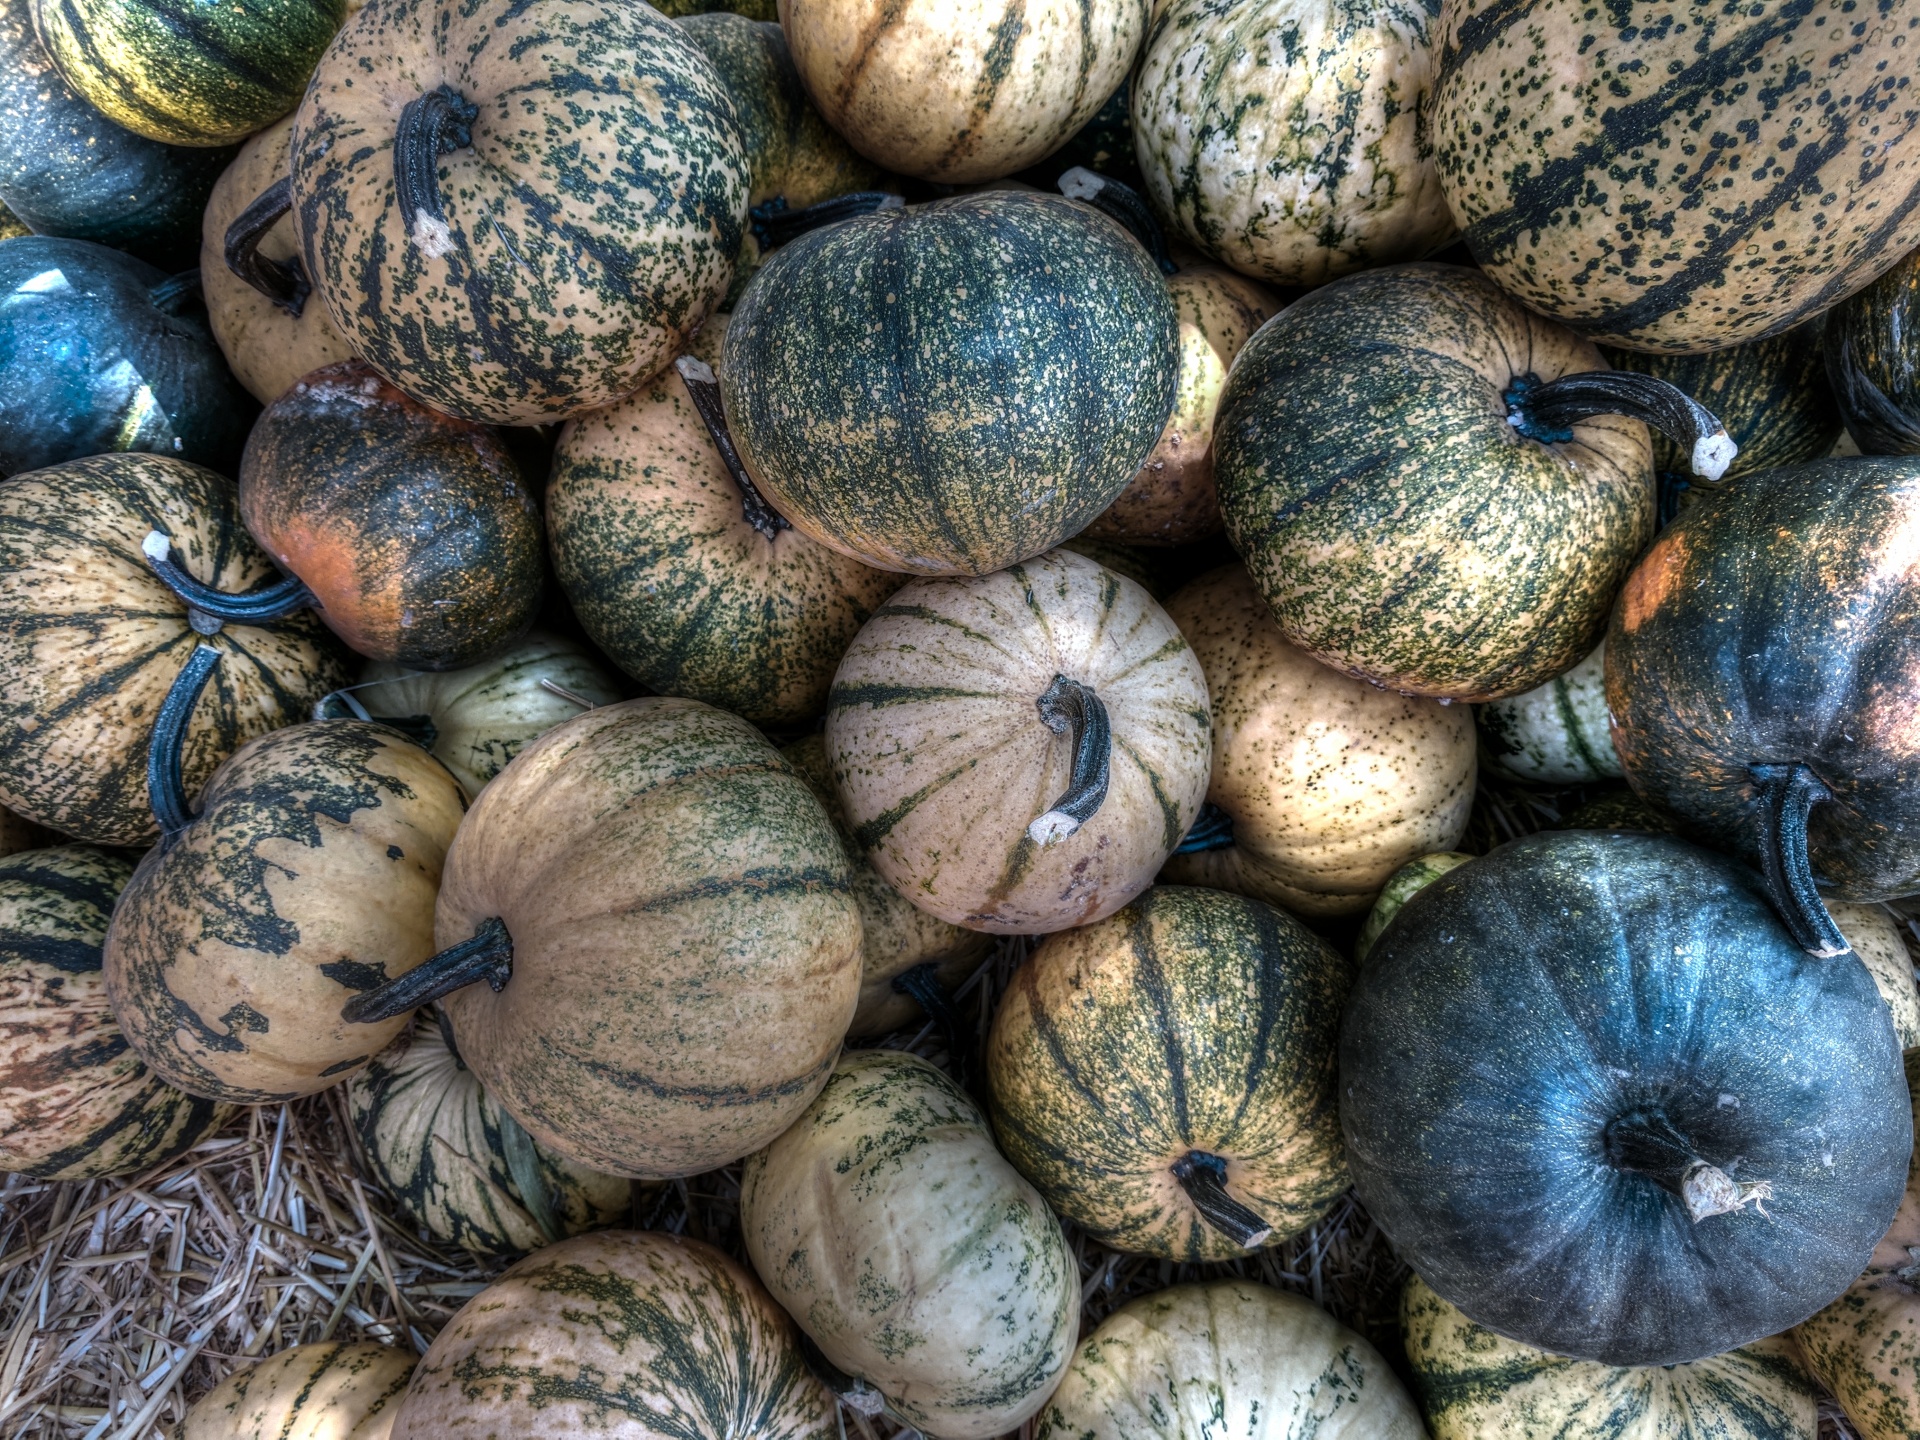 gourds vegetable food free photo